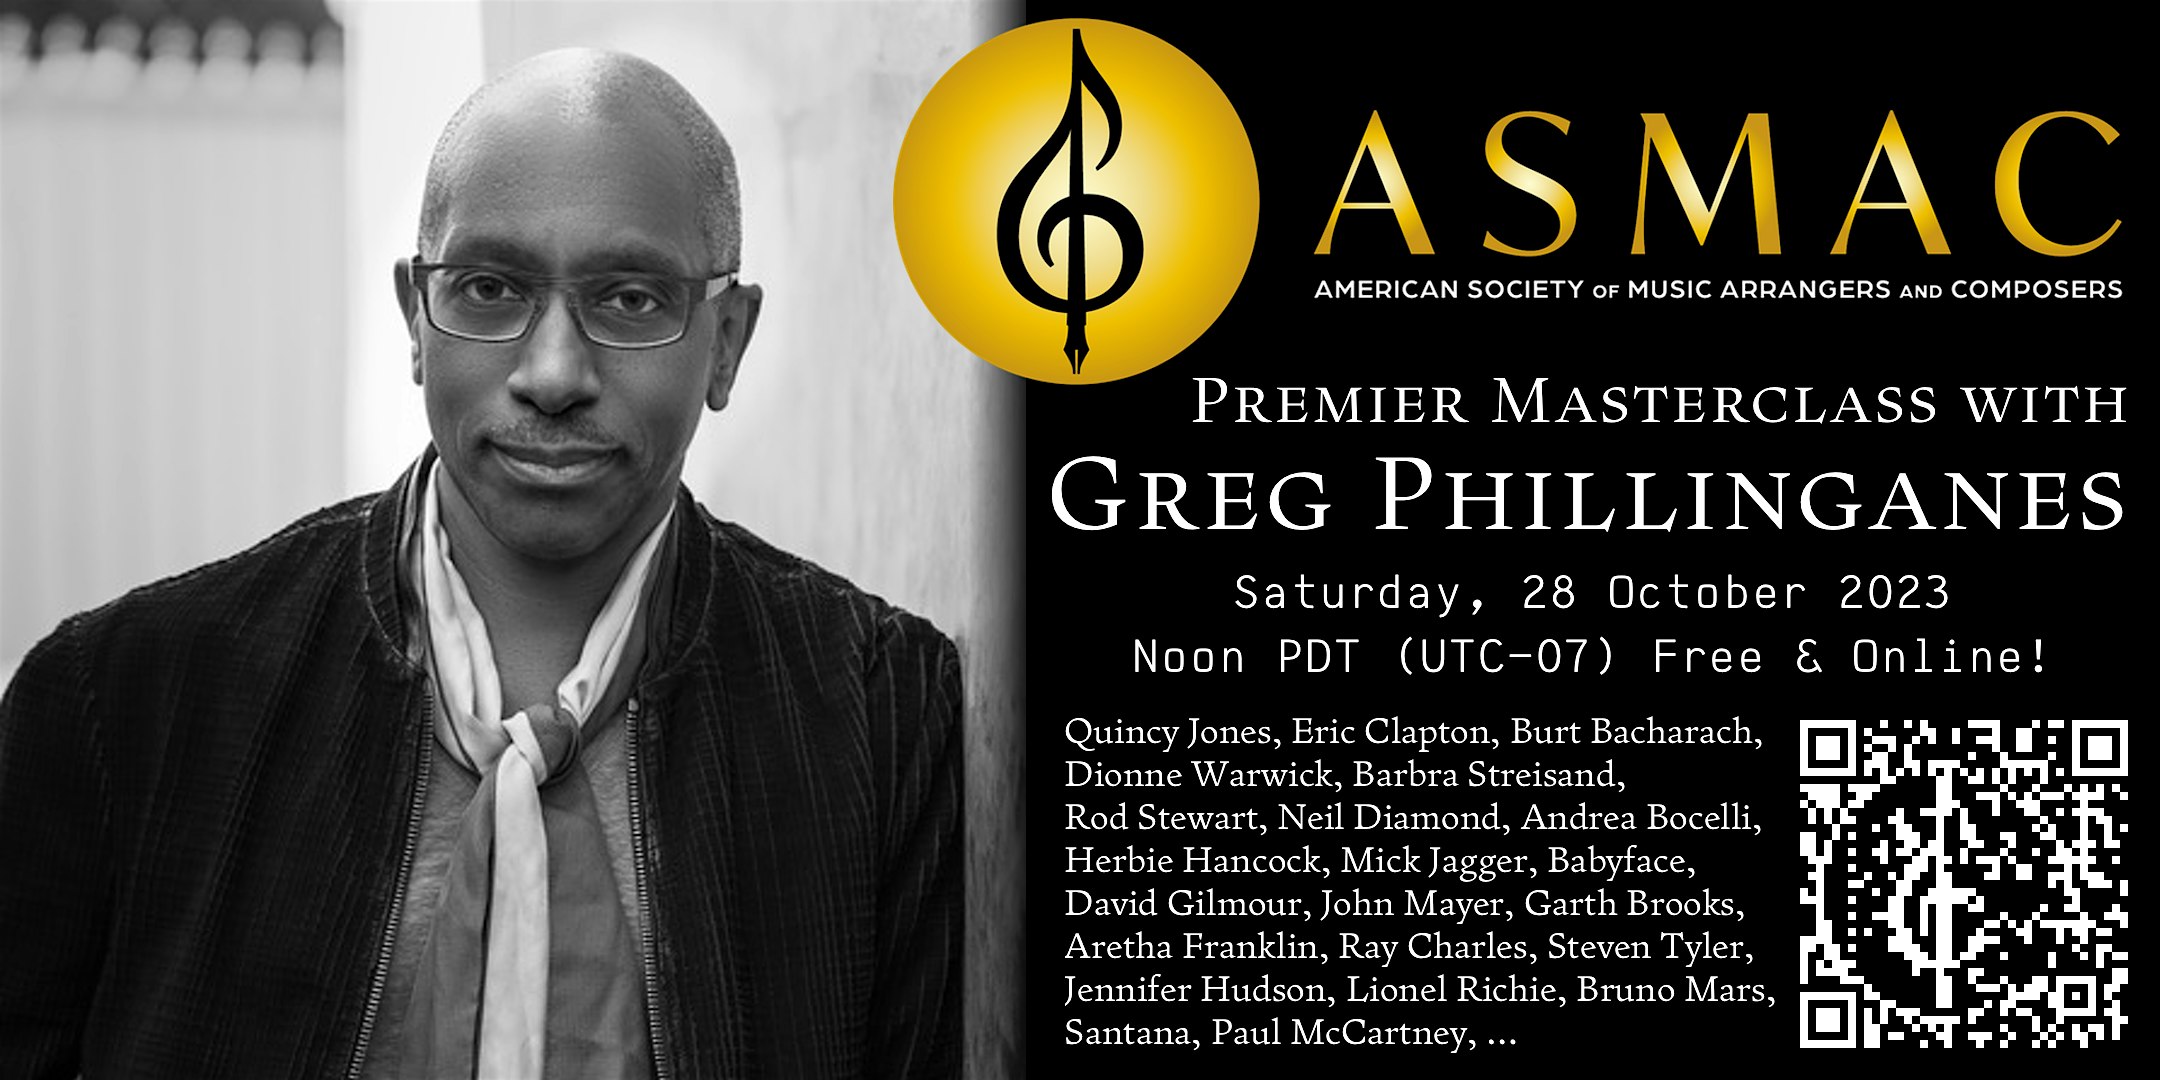 ASMAC Premier Masterclass: Greg Phillinganes, hosted by Sylvester Rivers.